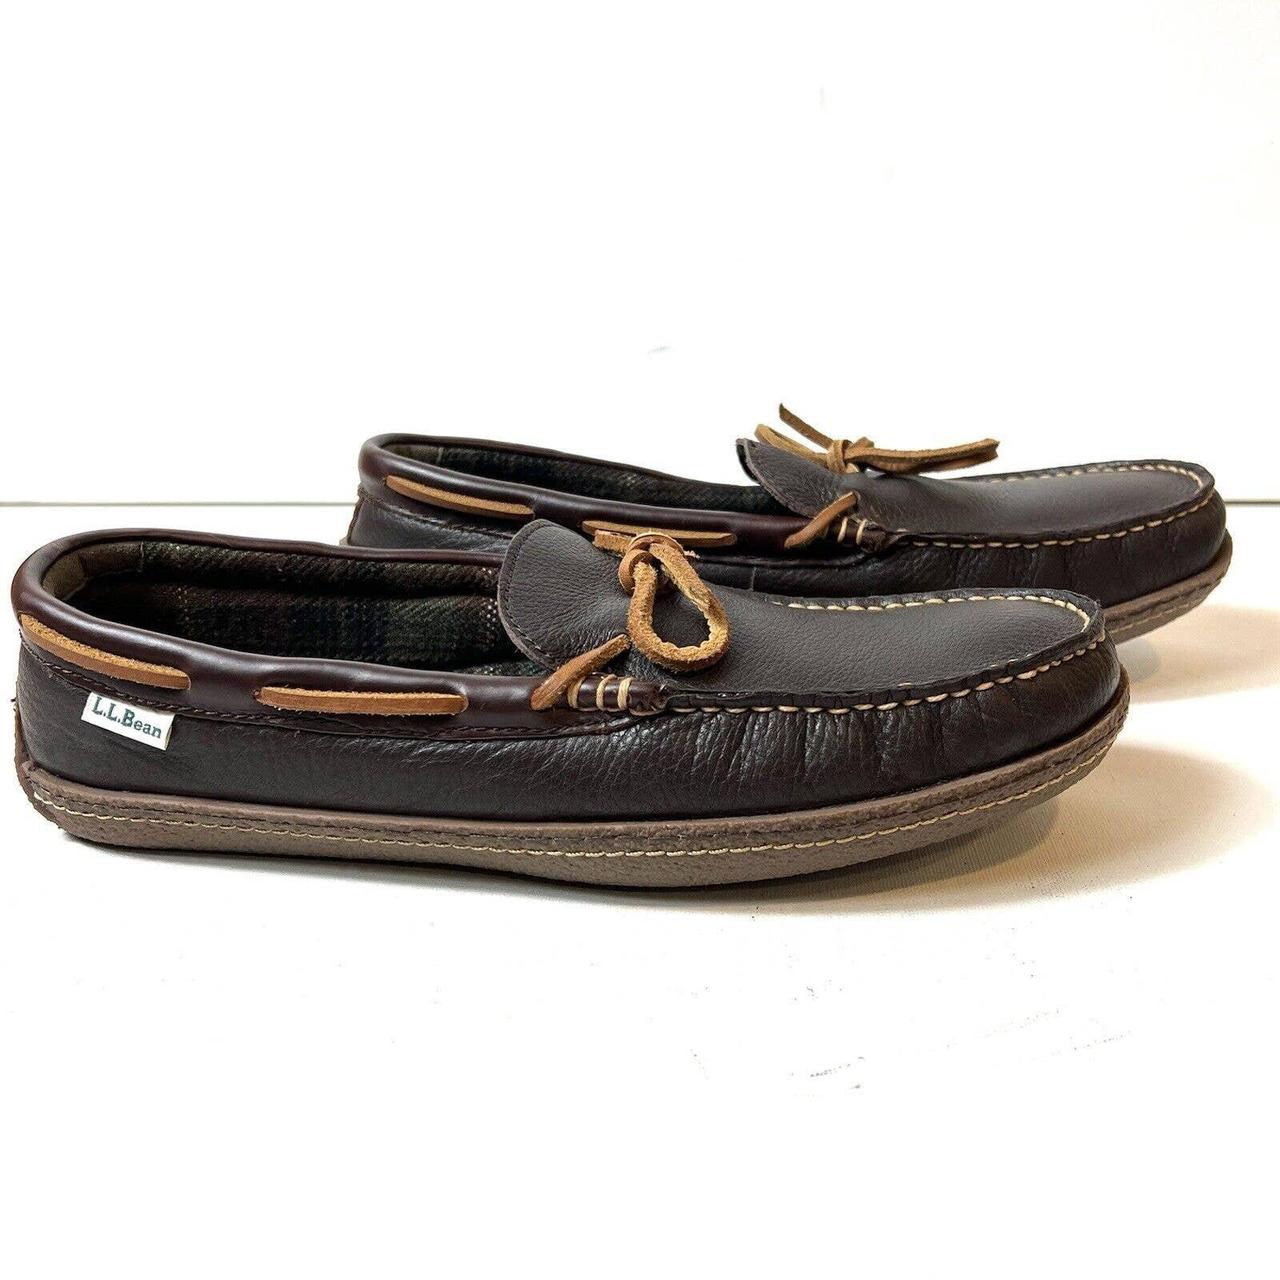 Product Image 2 - LL Bean Brown Leather Handsewn